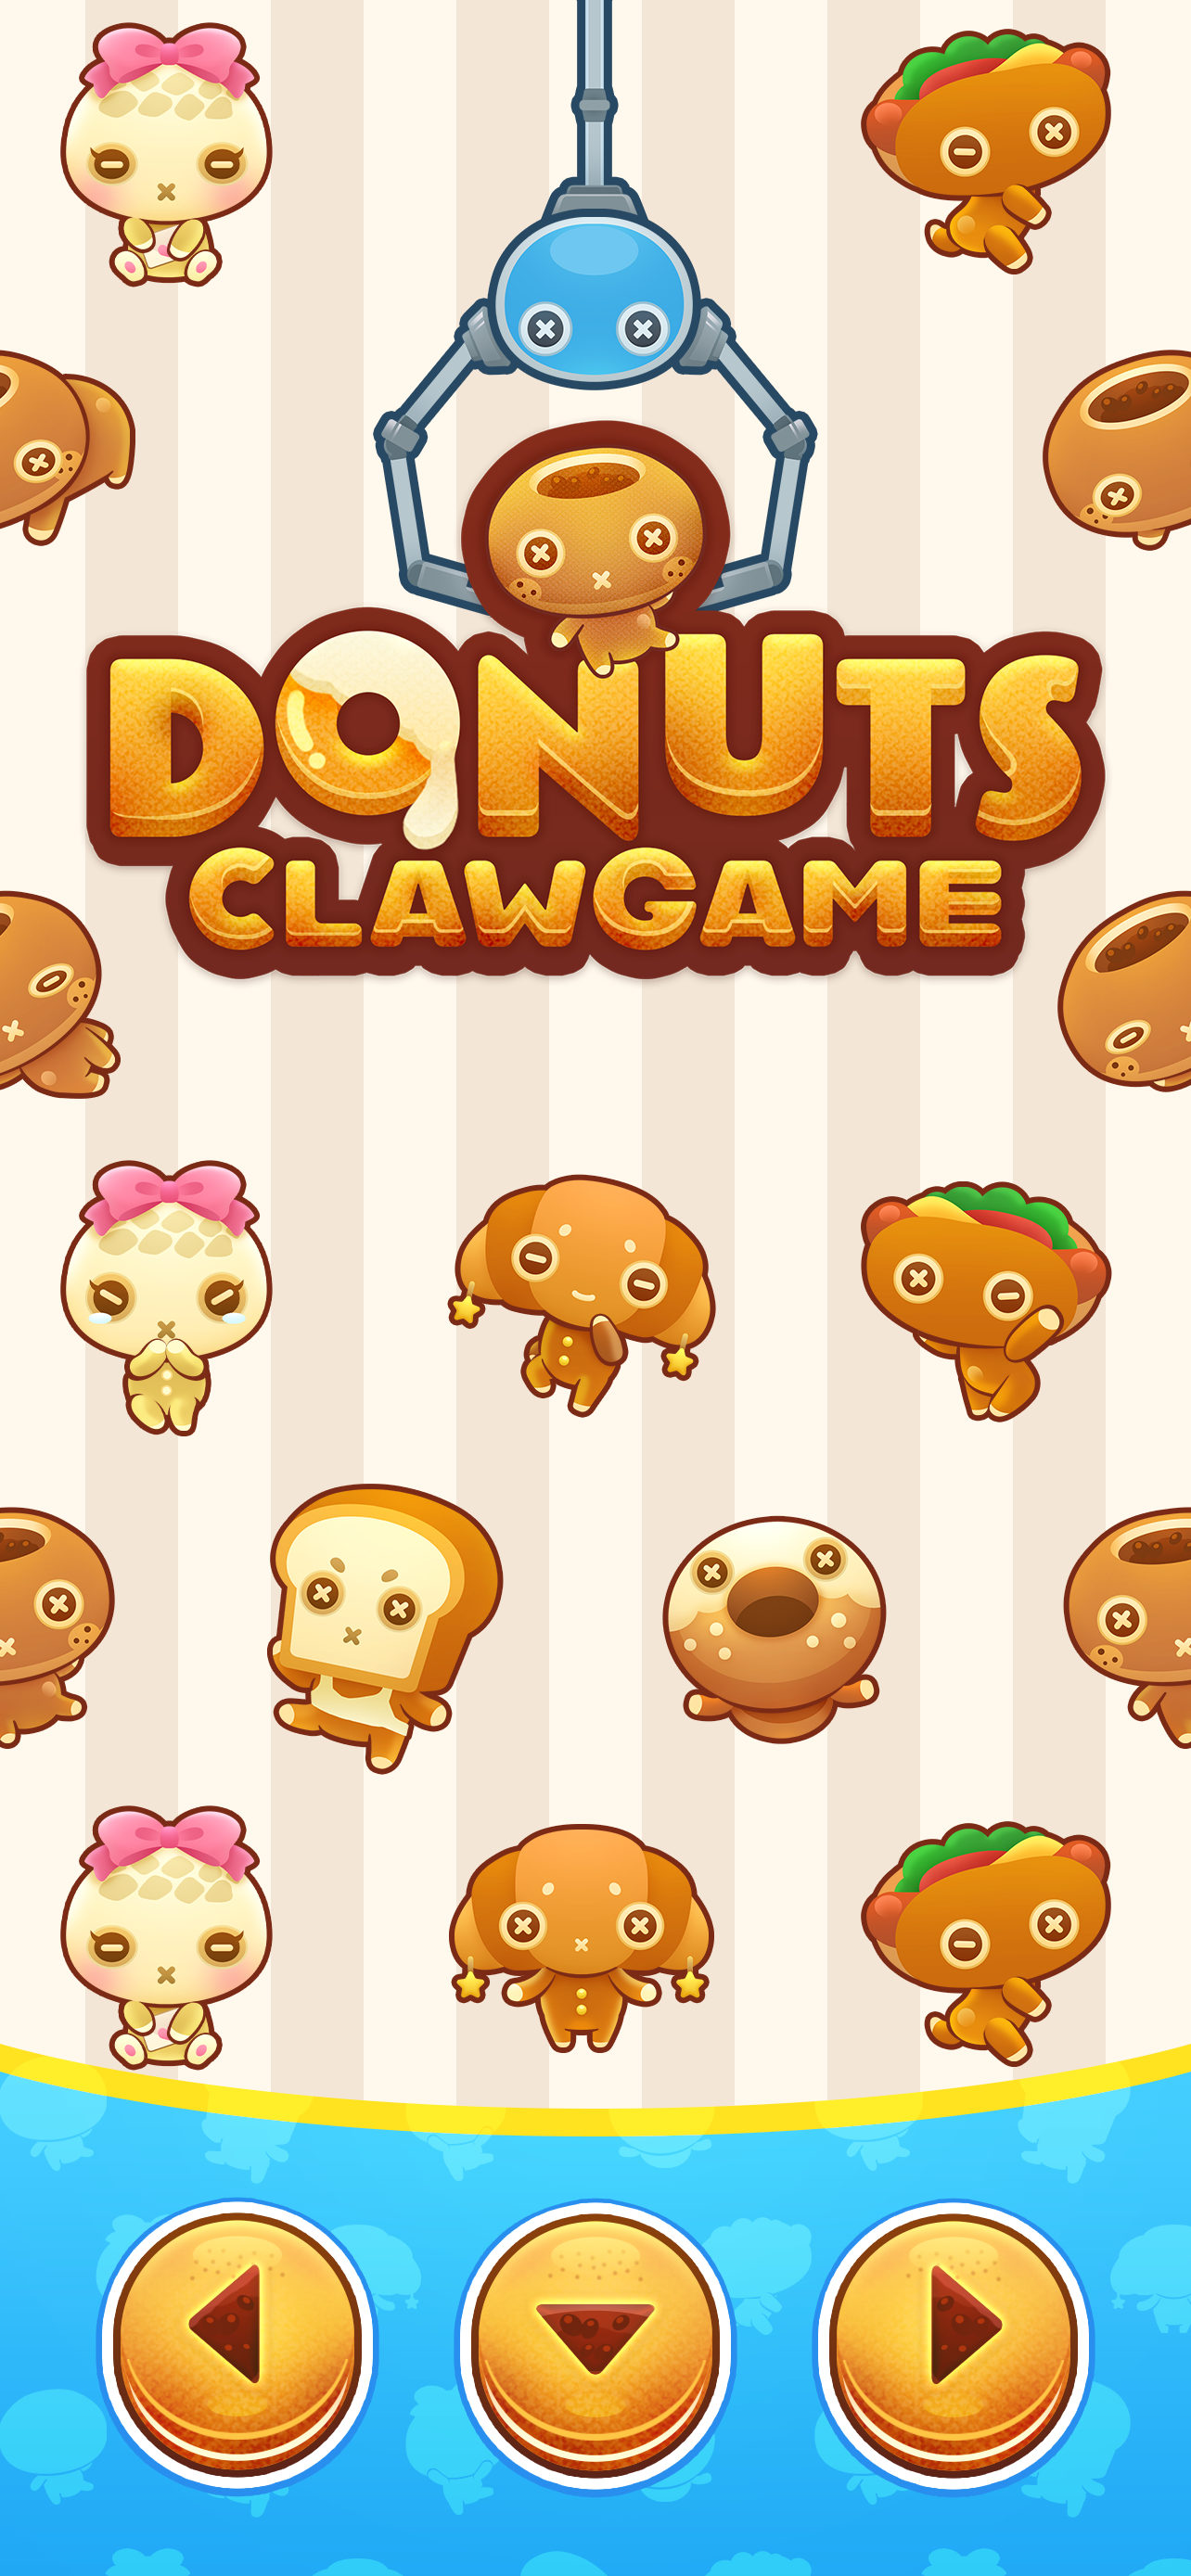 Donuts claw game游戏截图